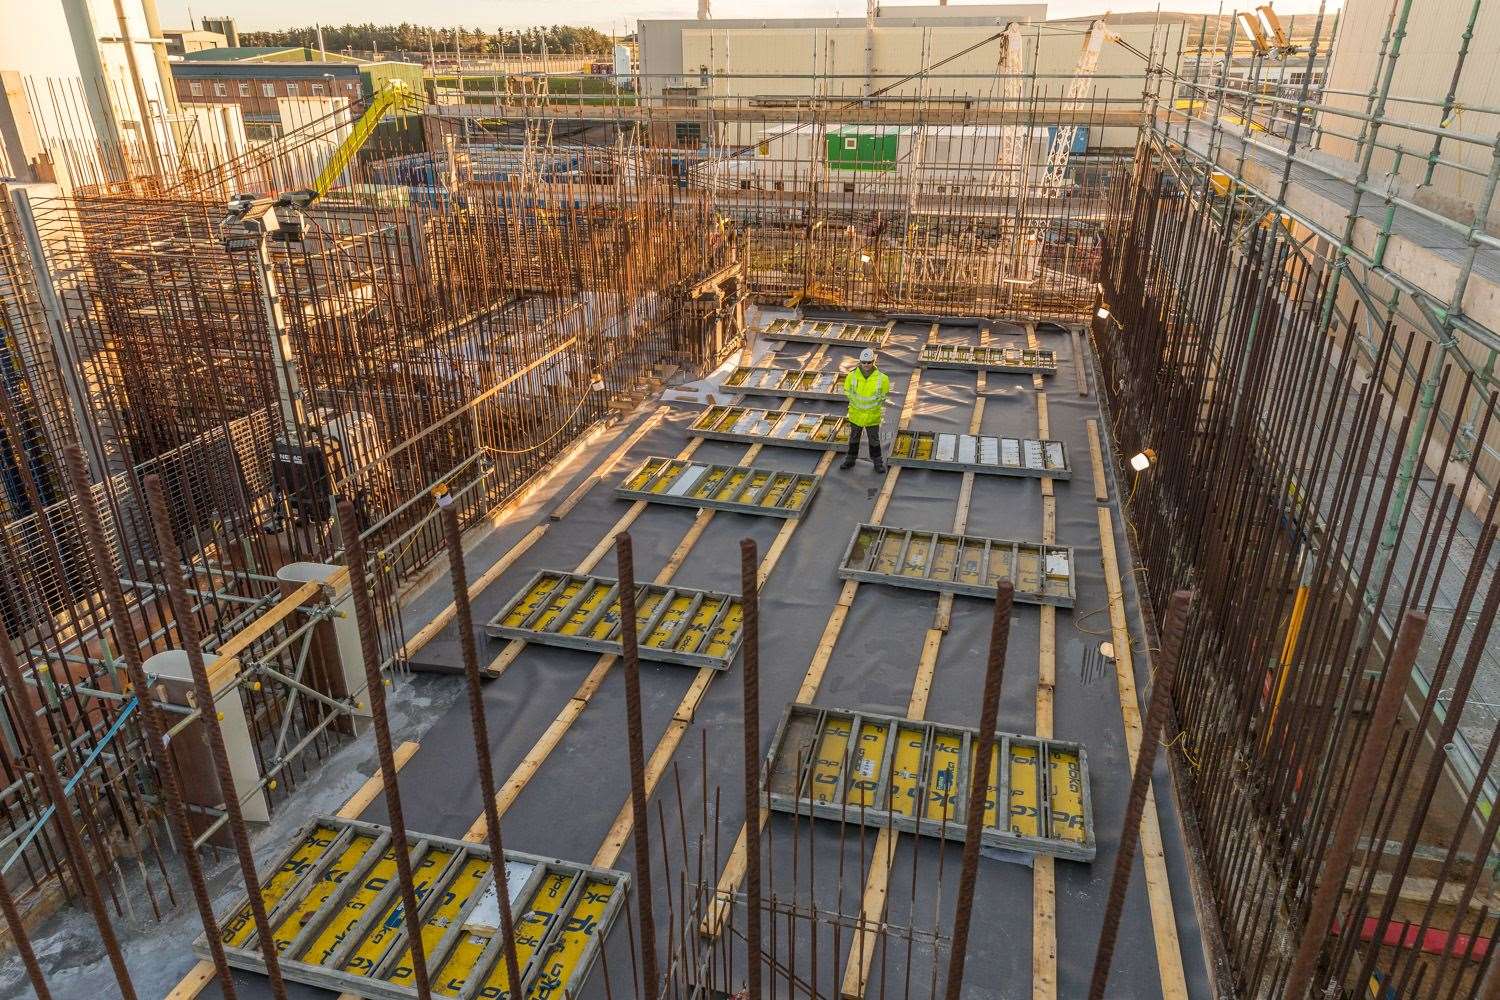 Casting the crane maintenance bay floor slab was described as a significant construction milestone for the project.